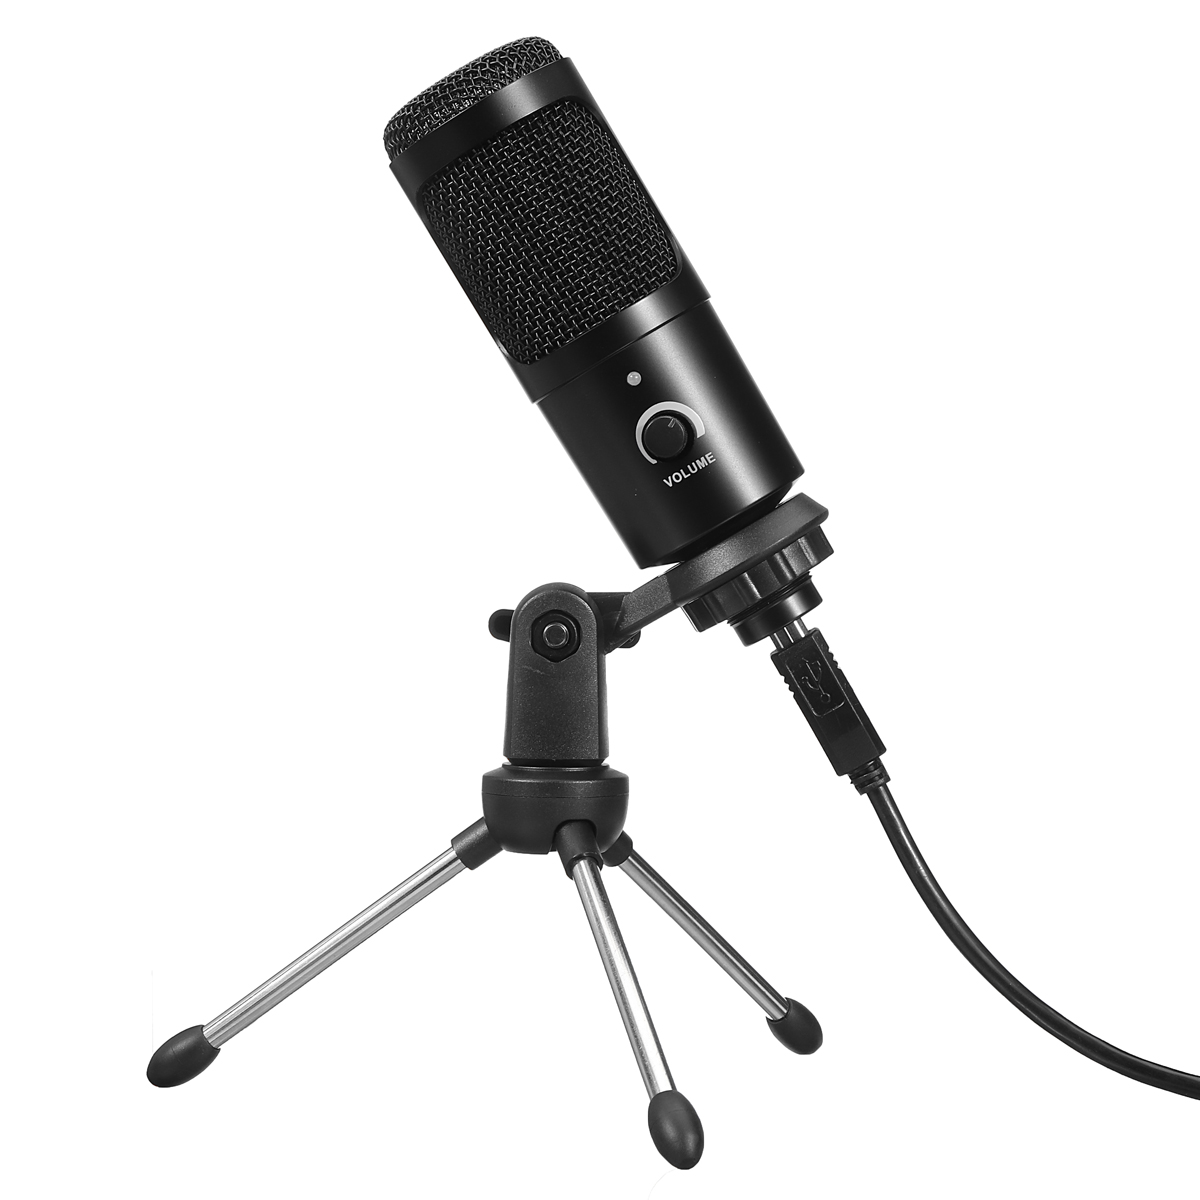 Wired-USB-Microphone-with-Tripod-for-Computer-Windows-for-Mac-PC-Live-Broadcast-Video-Conferencing-A-1866200-4